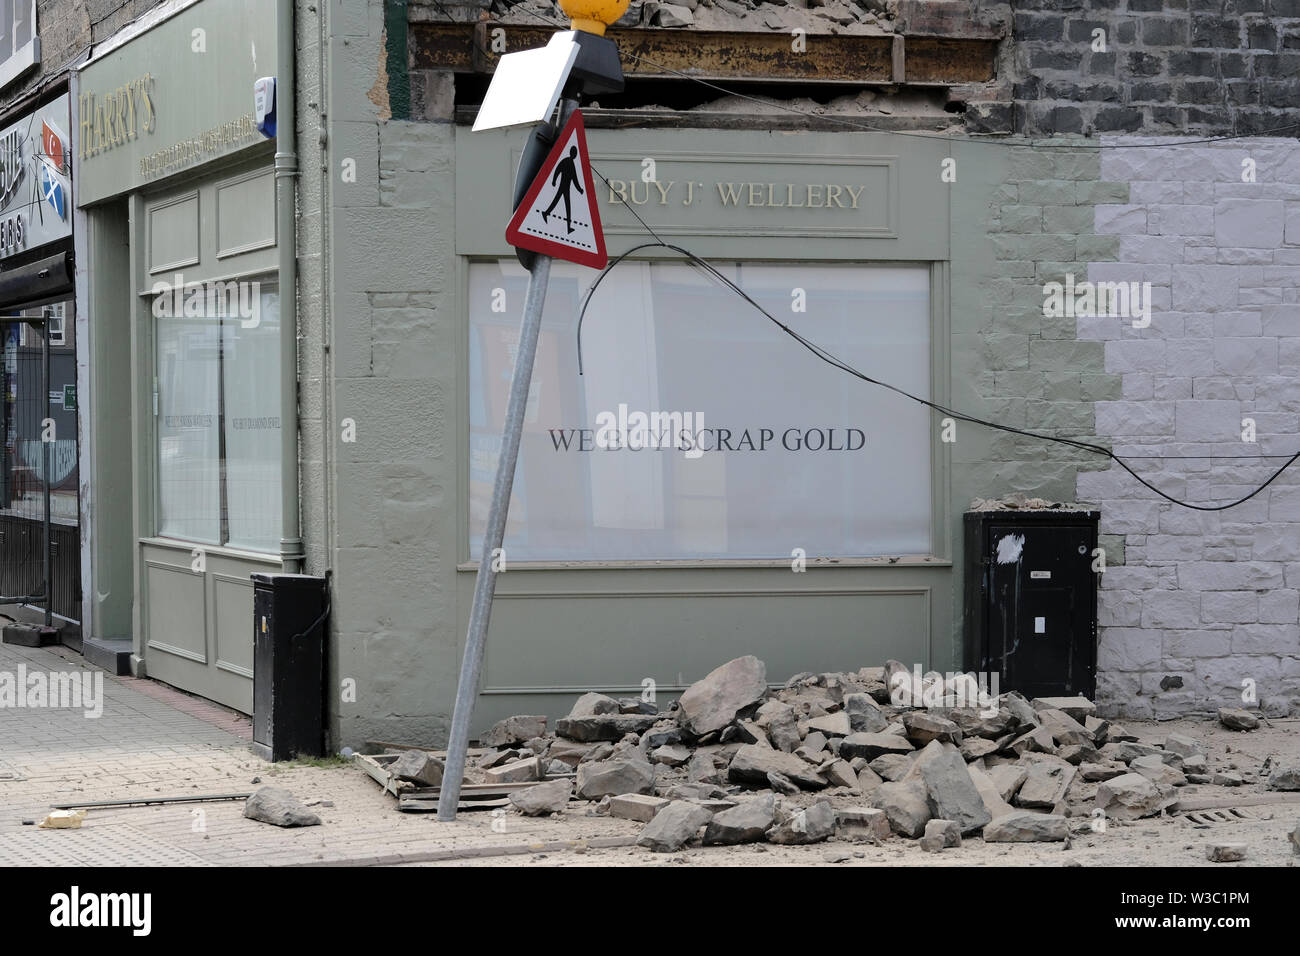 Galashiels, Scotland, UK. 14th July 2019.     Building Collapse, Galashiels The scene in Galashiels after part of an upper floor house exterior wall collapsed. A street in Galashiels town centre is currently closed after part of a building collapsed. The incident happened in Park Street this morning (Sunday). No one was injured.  Credit: Rob Gray/Alamy Live News Stock Photo